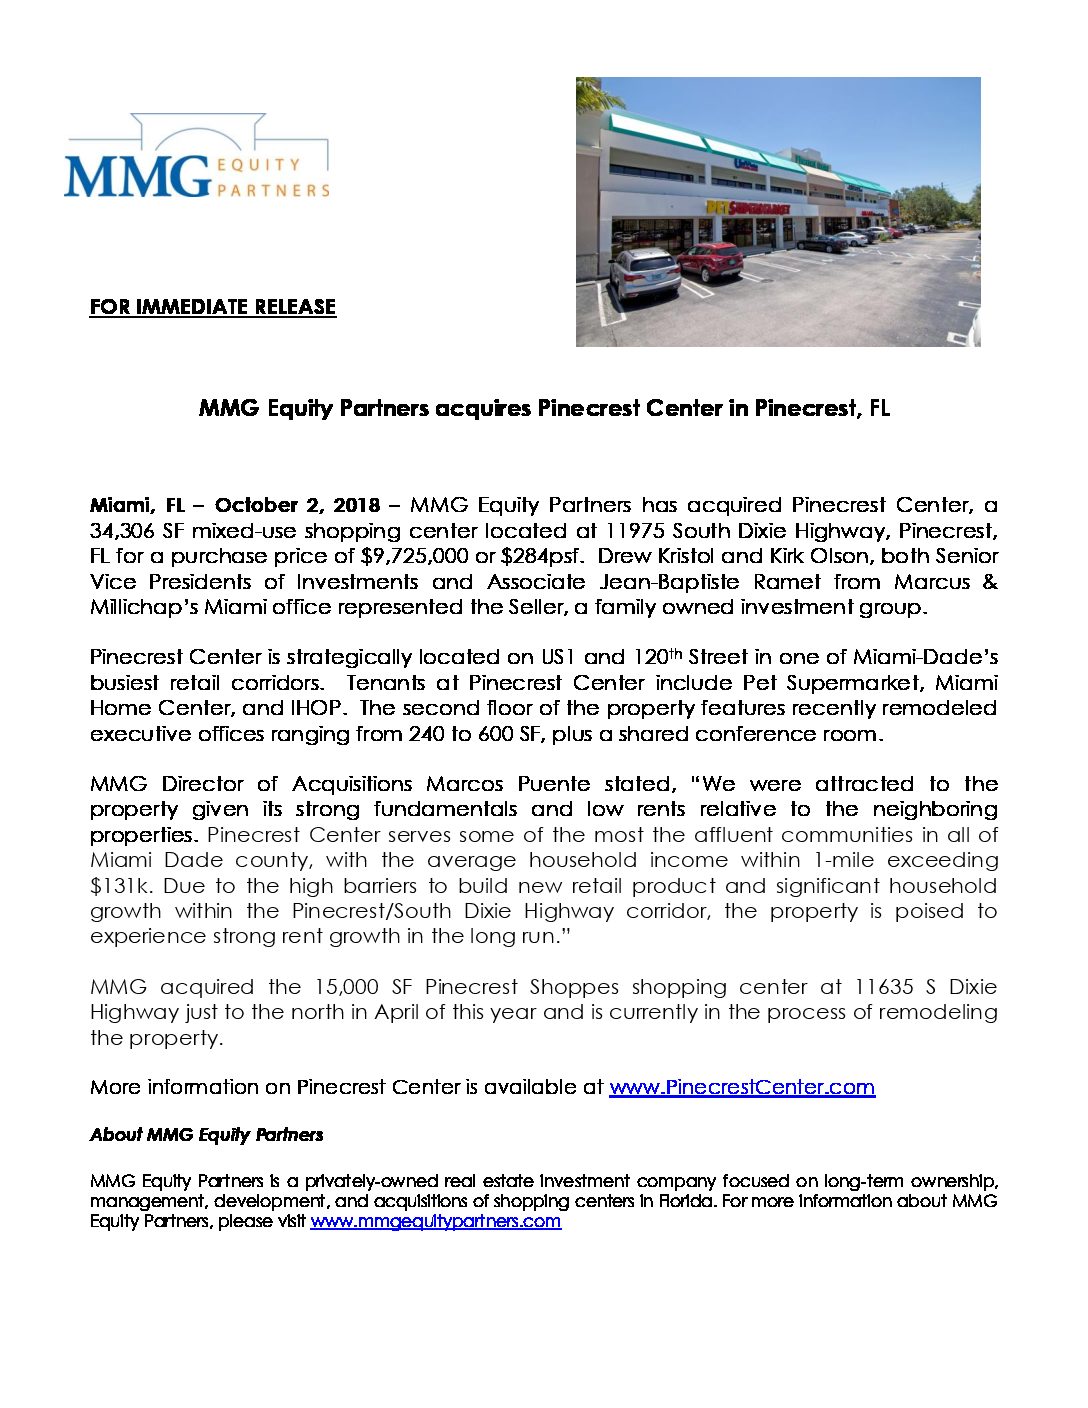 Press Release – MMG Acquires Pinecrest Center